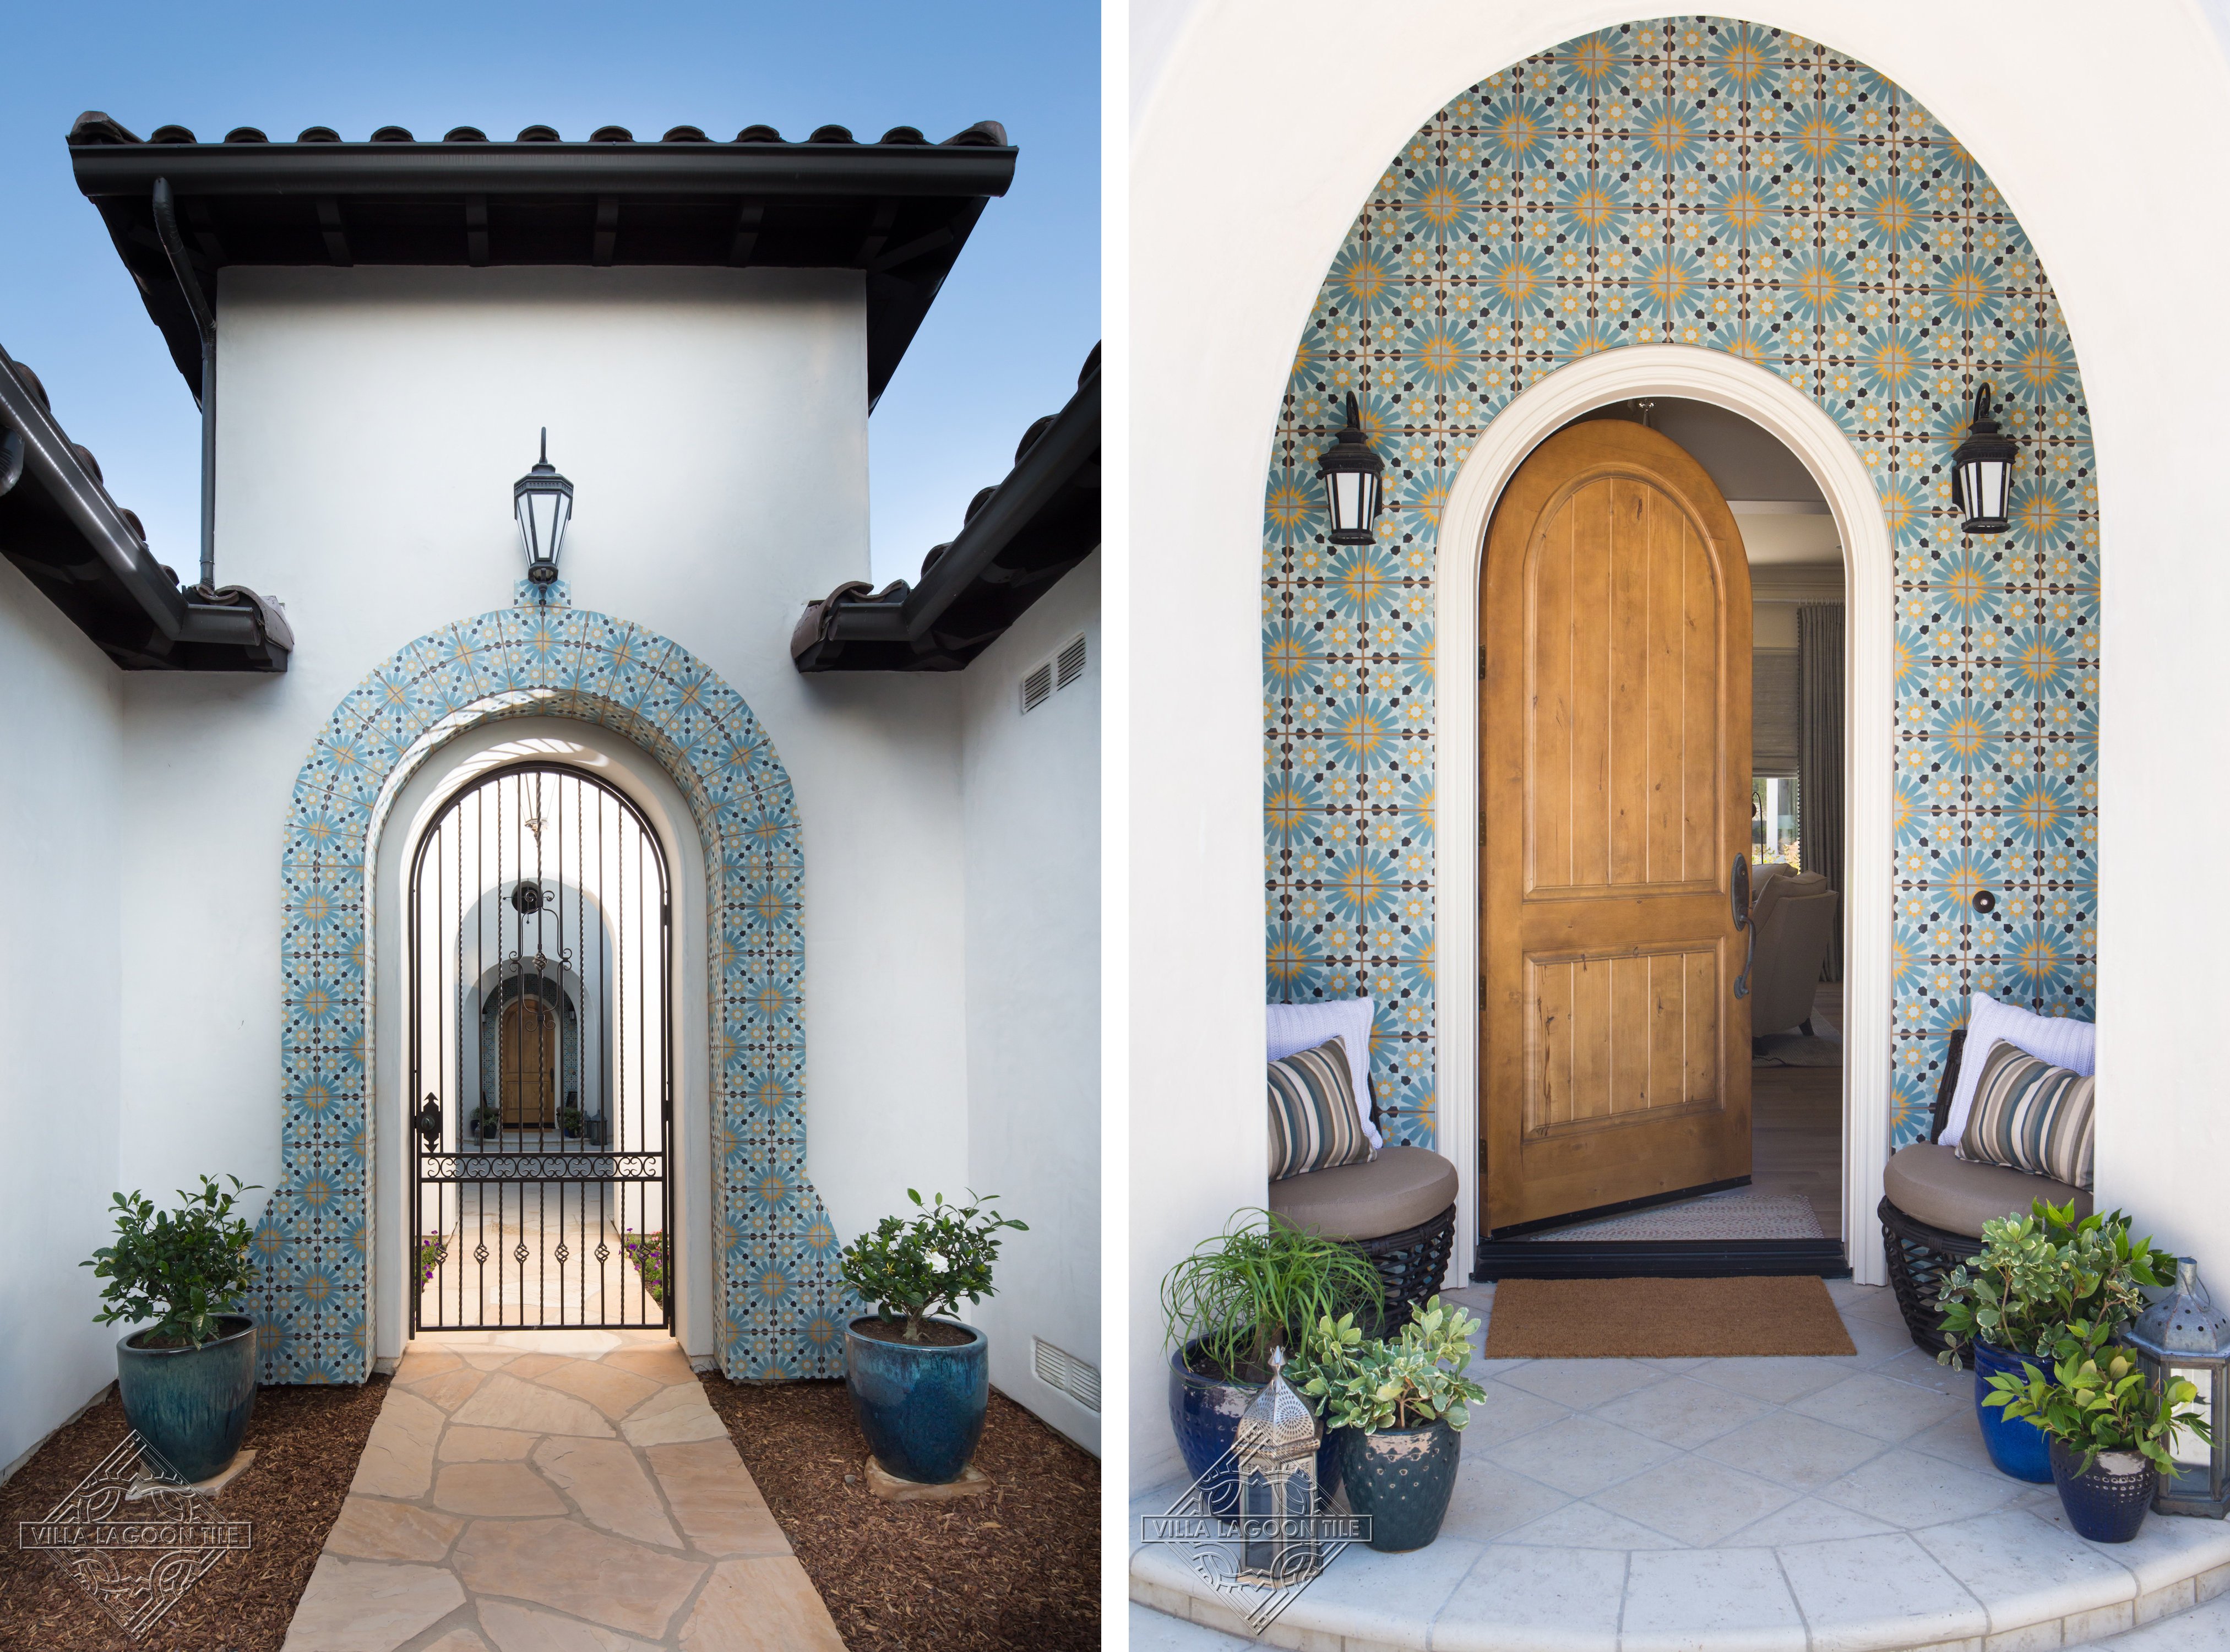 Tangier Primero cement tile on the courtyard entry wall, set in an arch, and home exterior wall at the main door. 